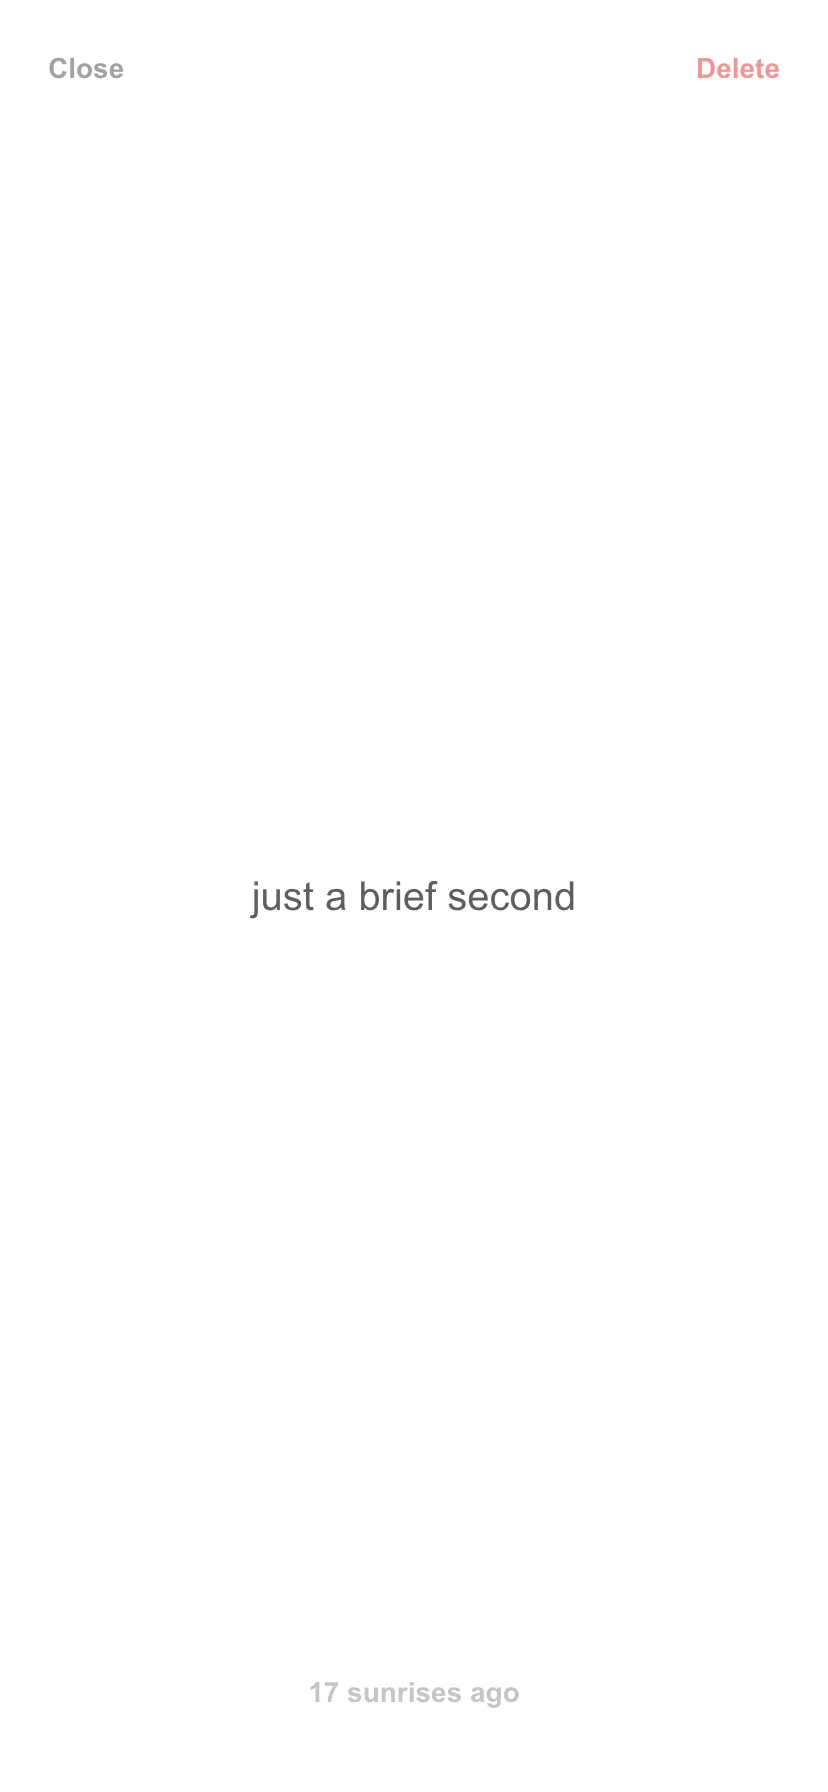 app interface with the words 'just a brief second' in the center